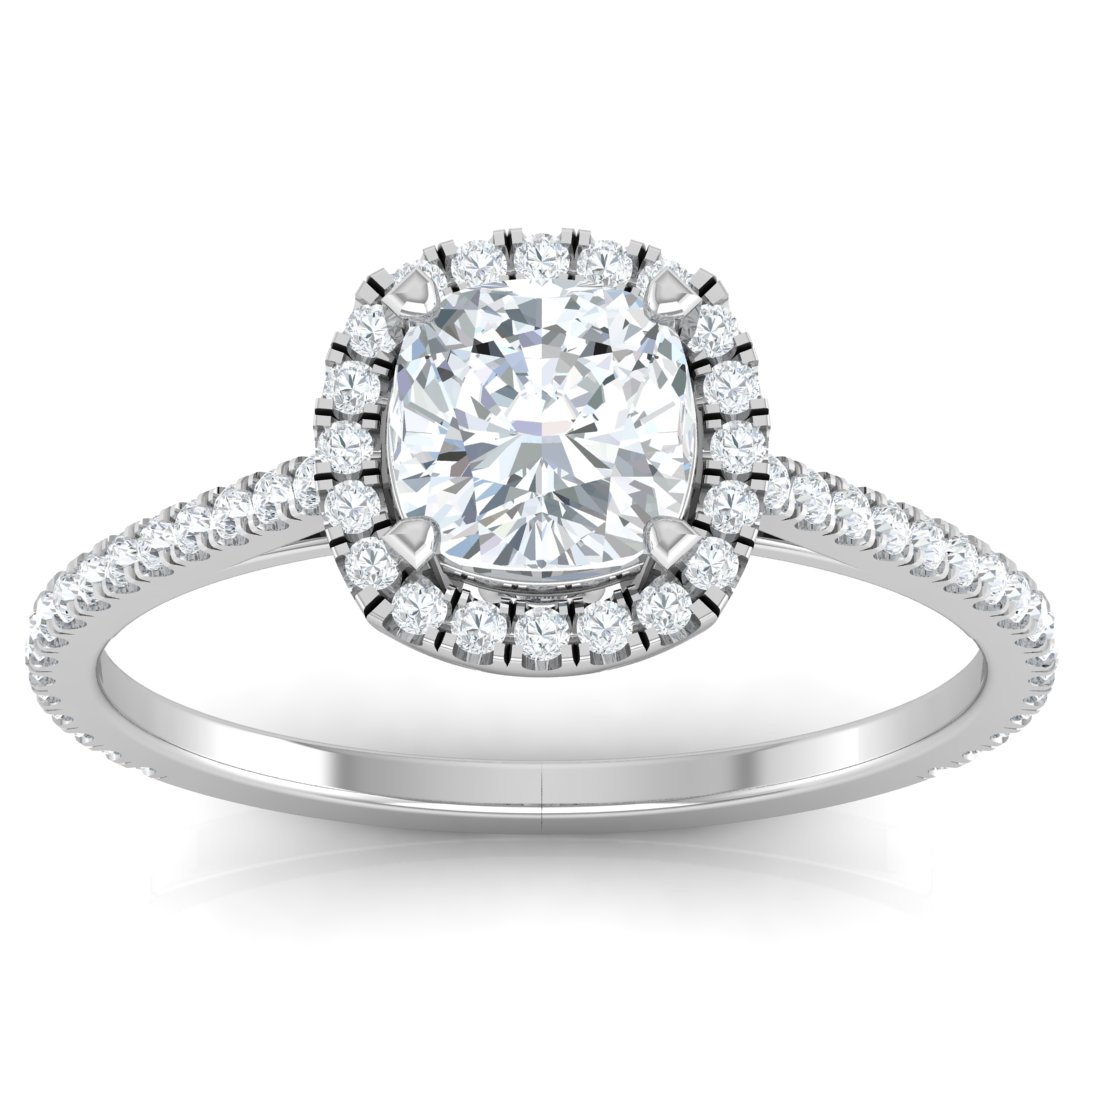 Engagement ring guide | Halo setting engagement ring